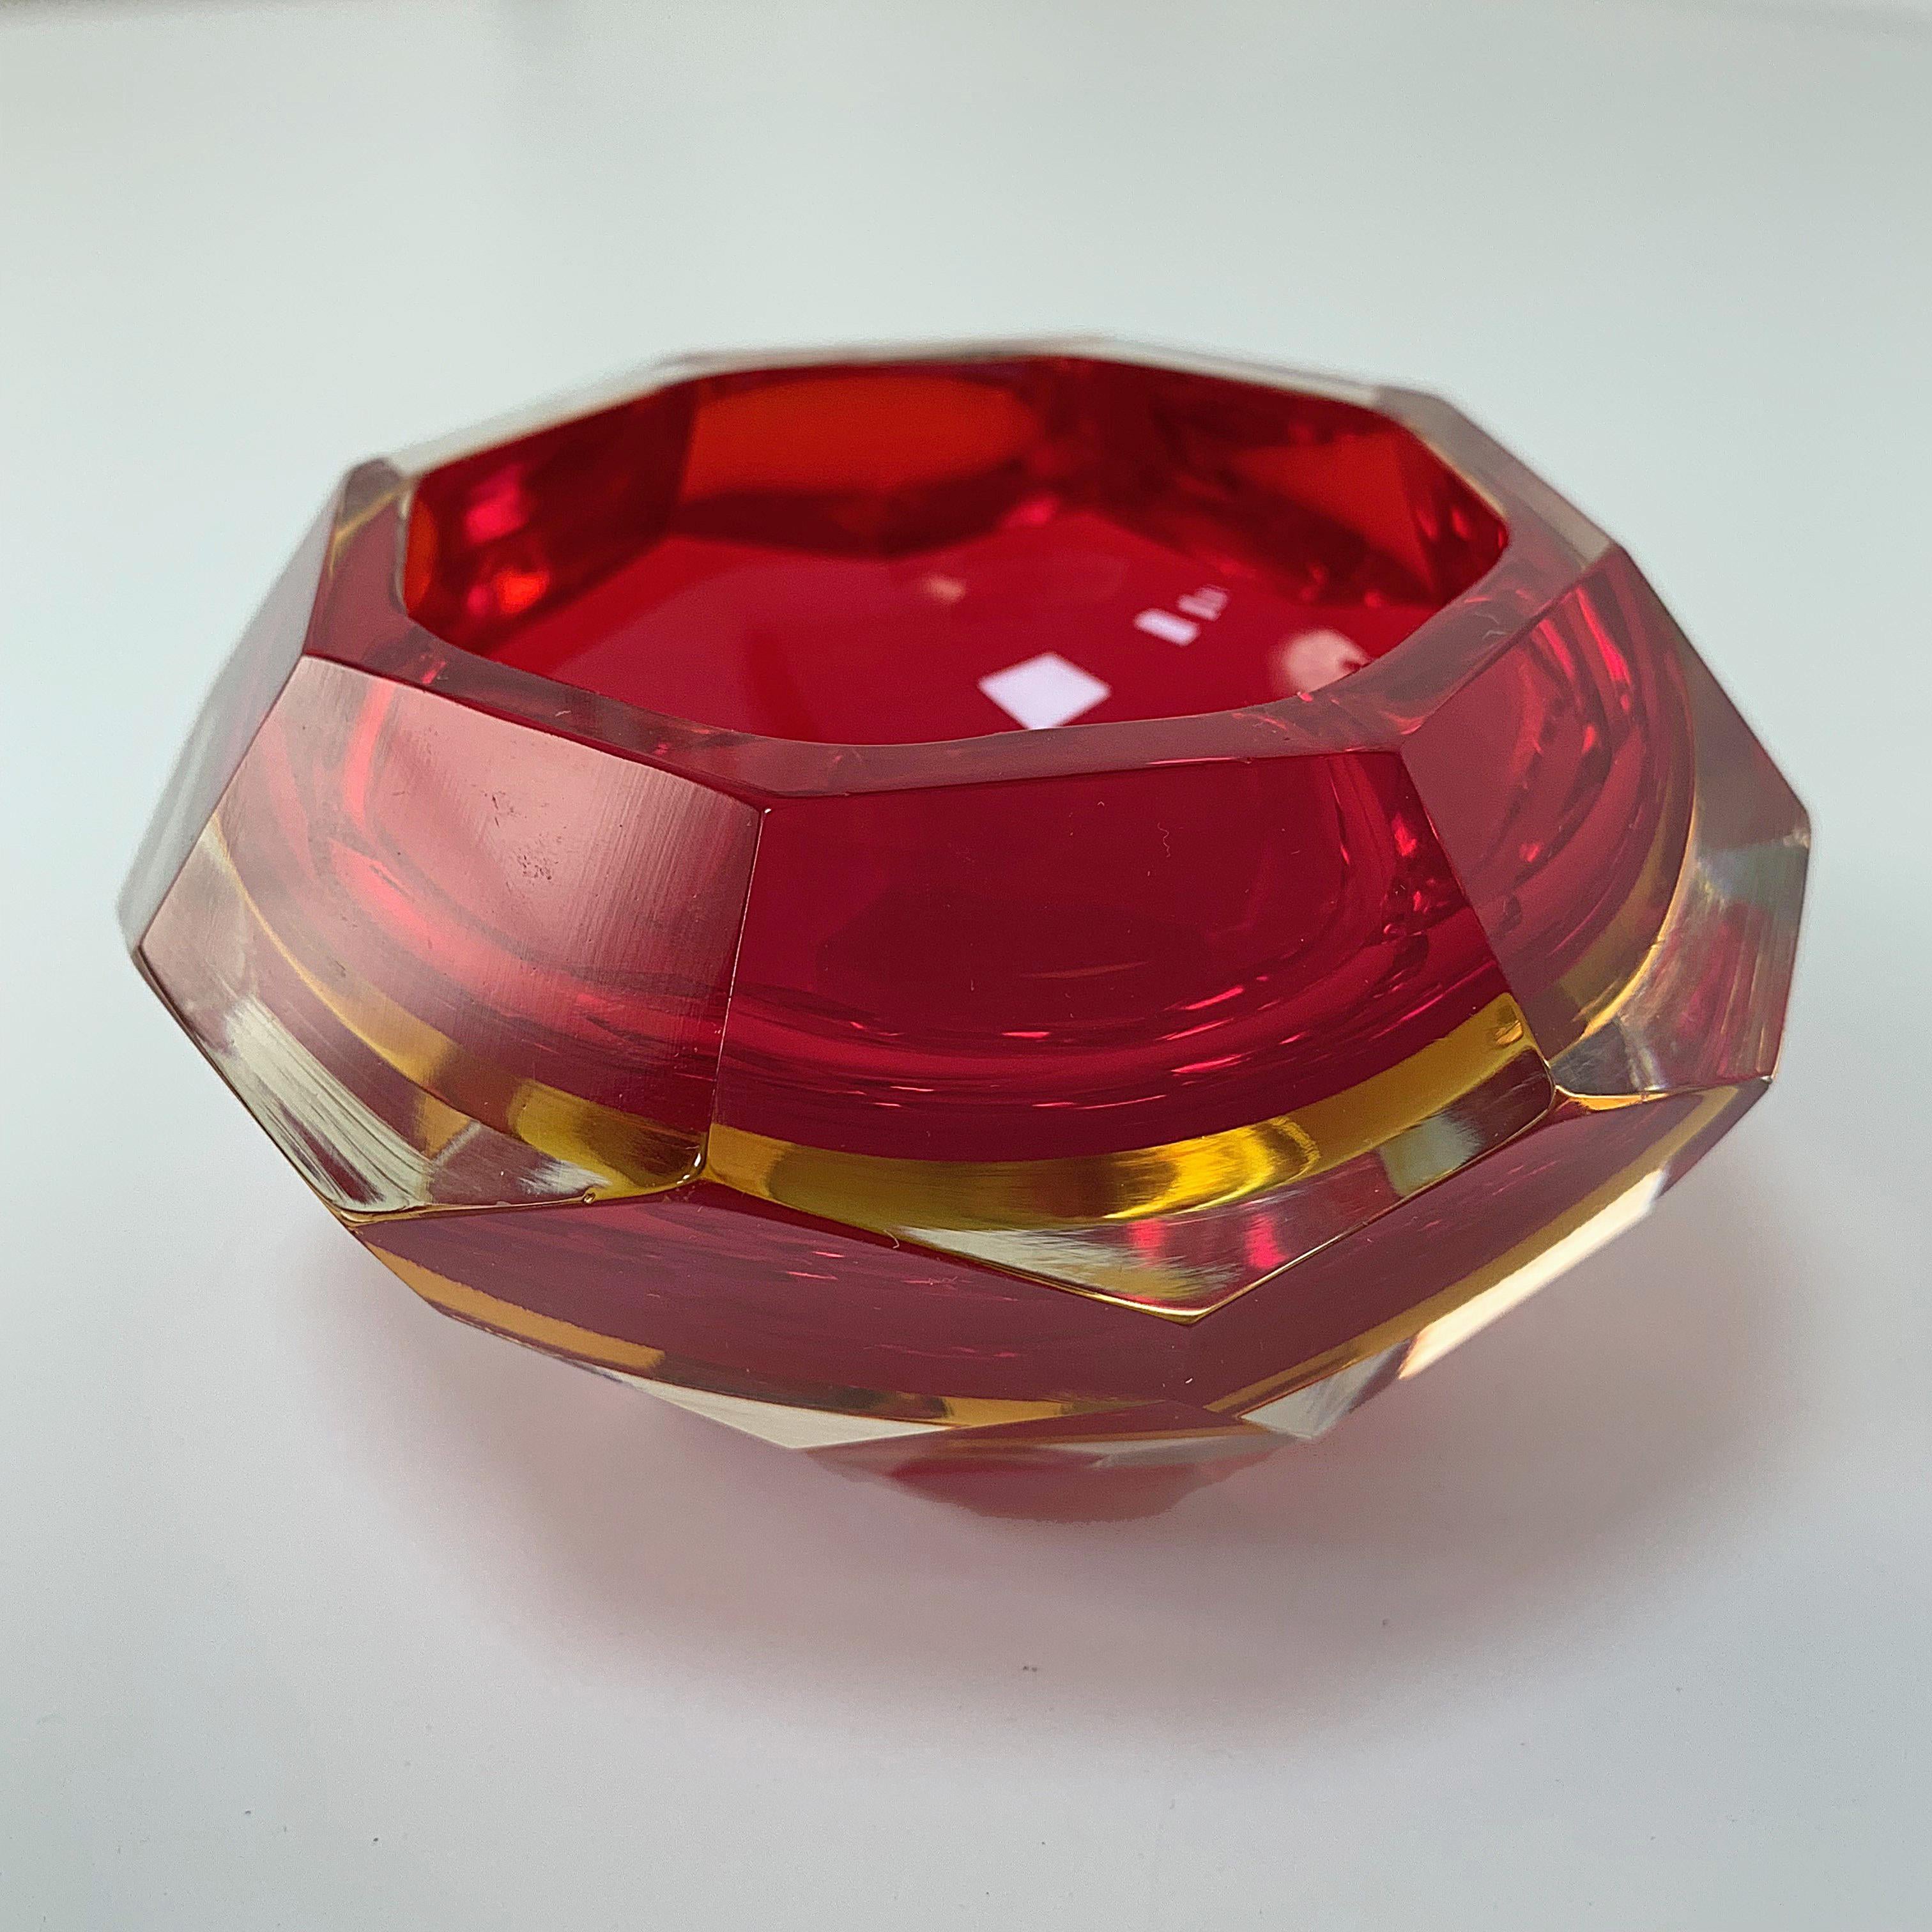 Italian Murano Ashtray, Flavio Poli, Submerged Glass, Red Faceted Glass, Italy, 1950s For Sale